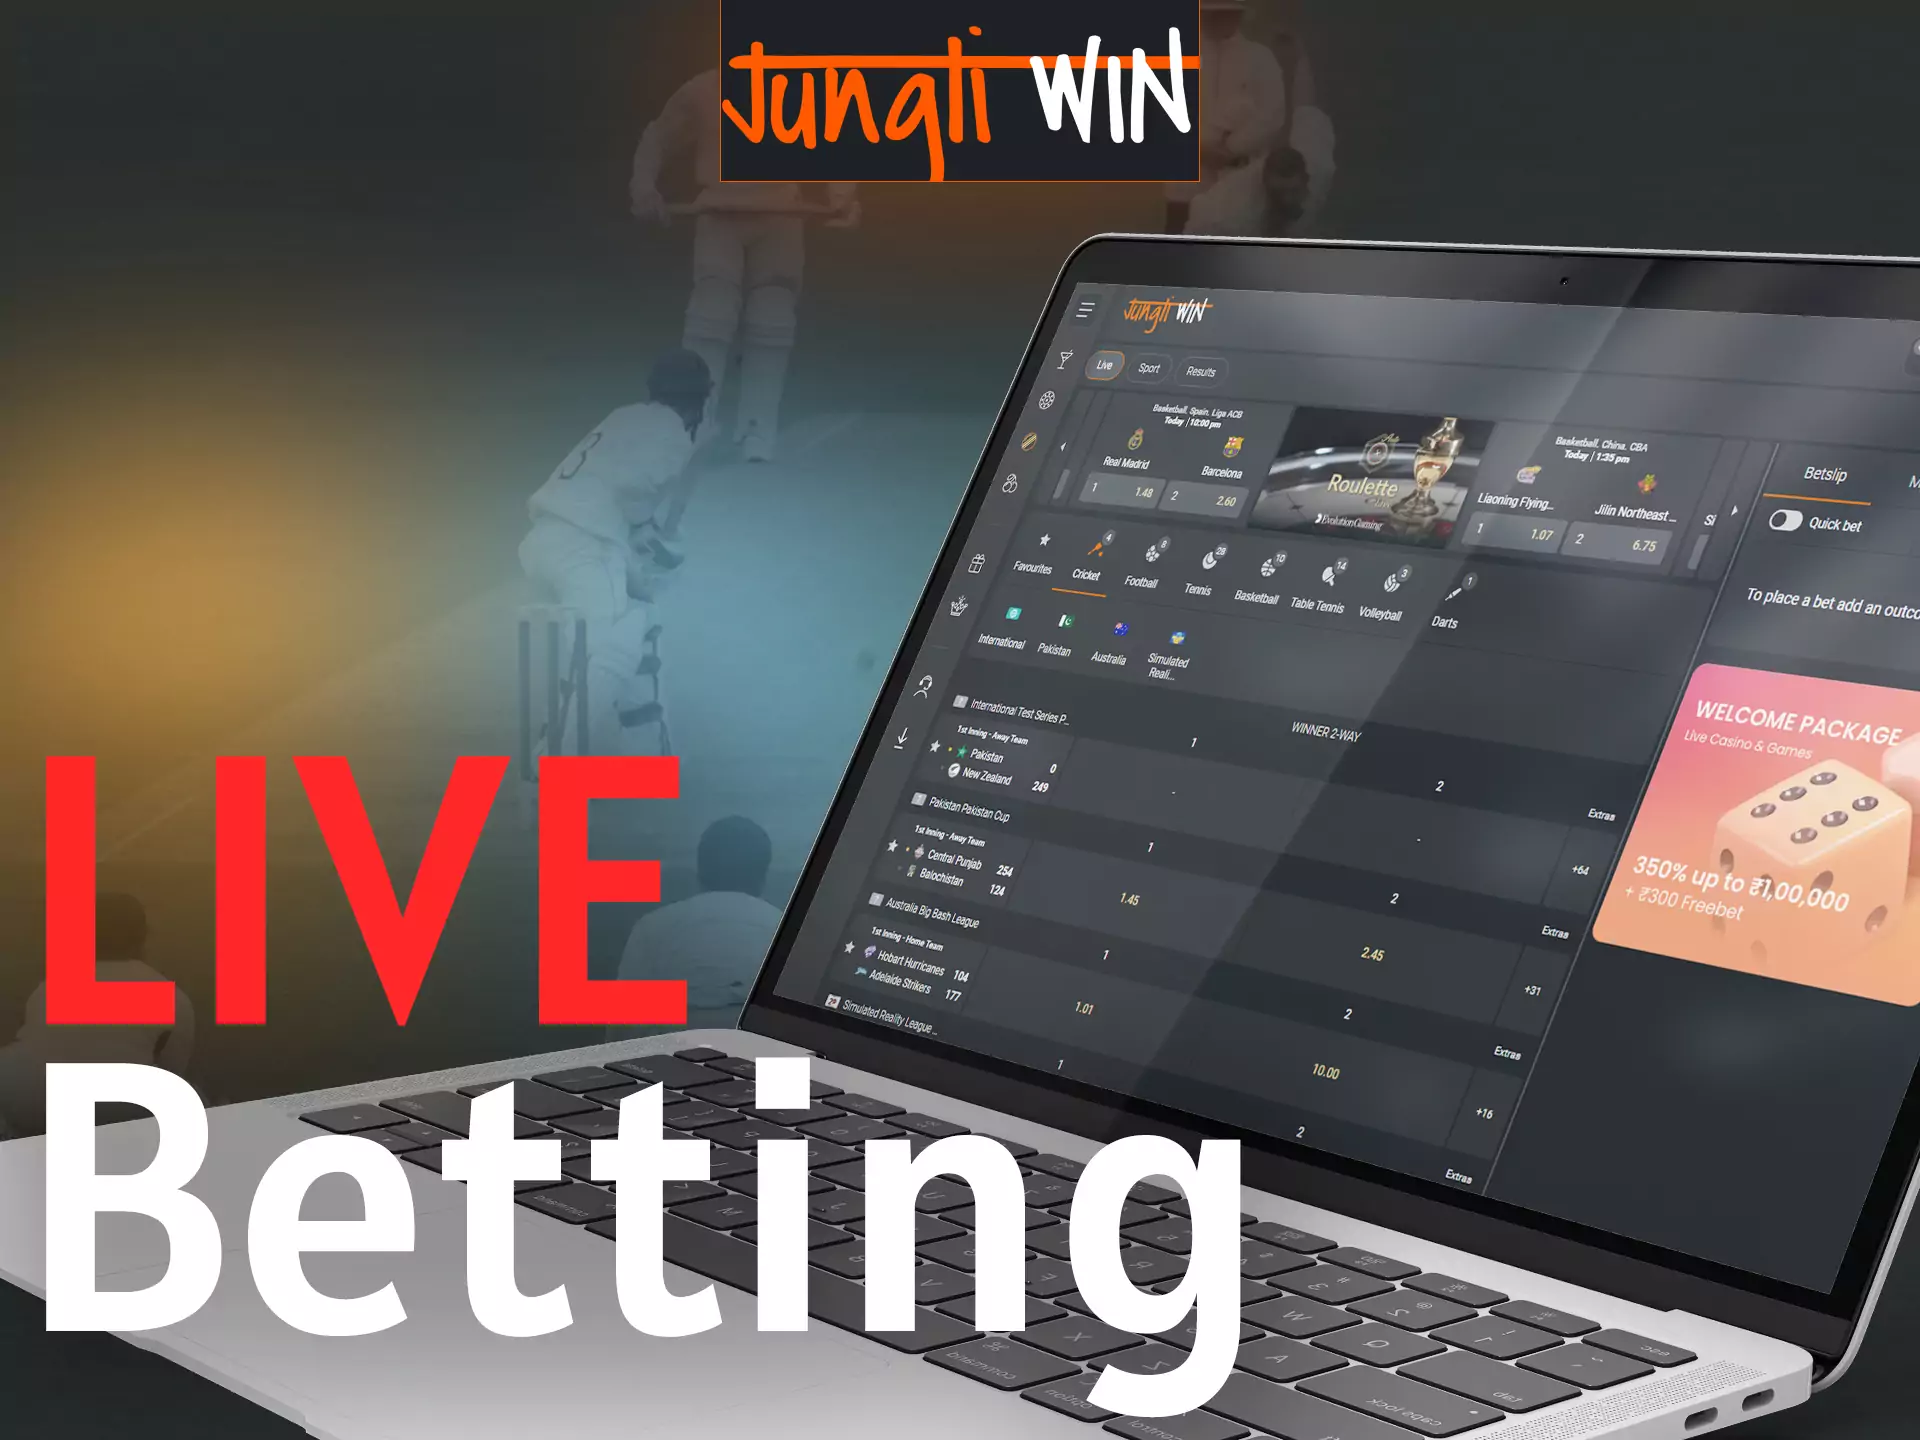 Jungliwin offers the opportunity to place bets during live broadcasts.